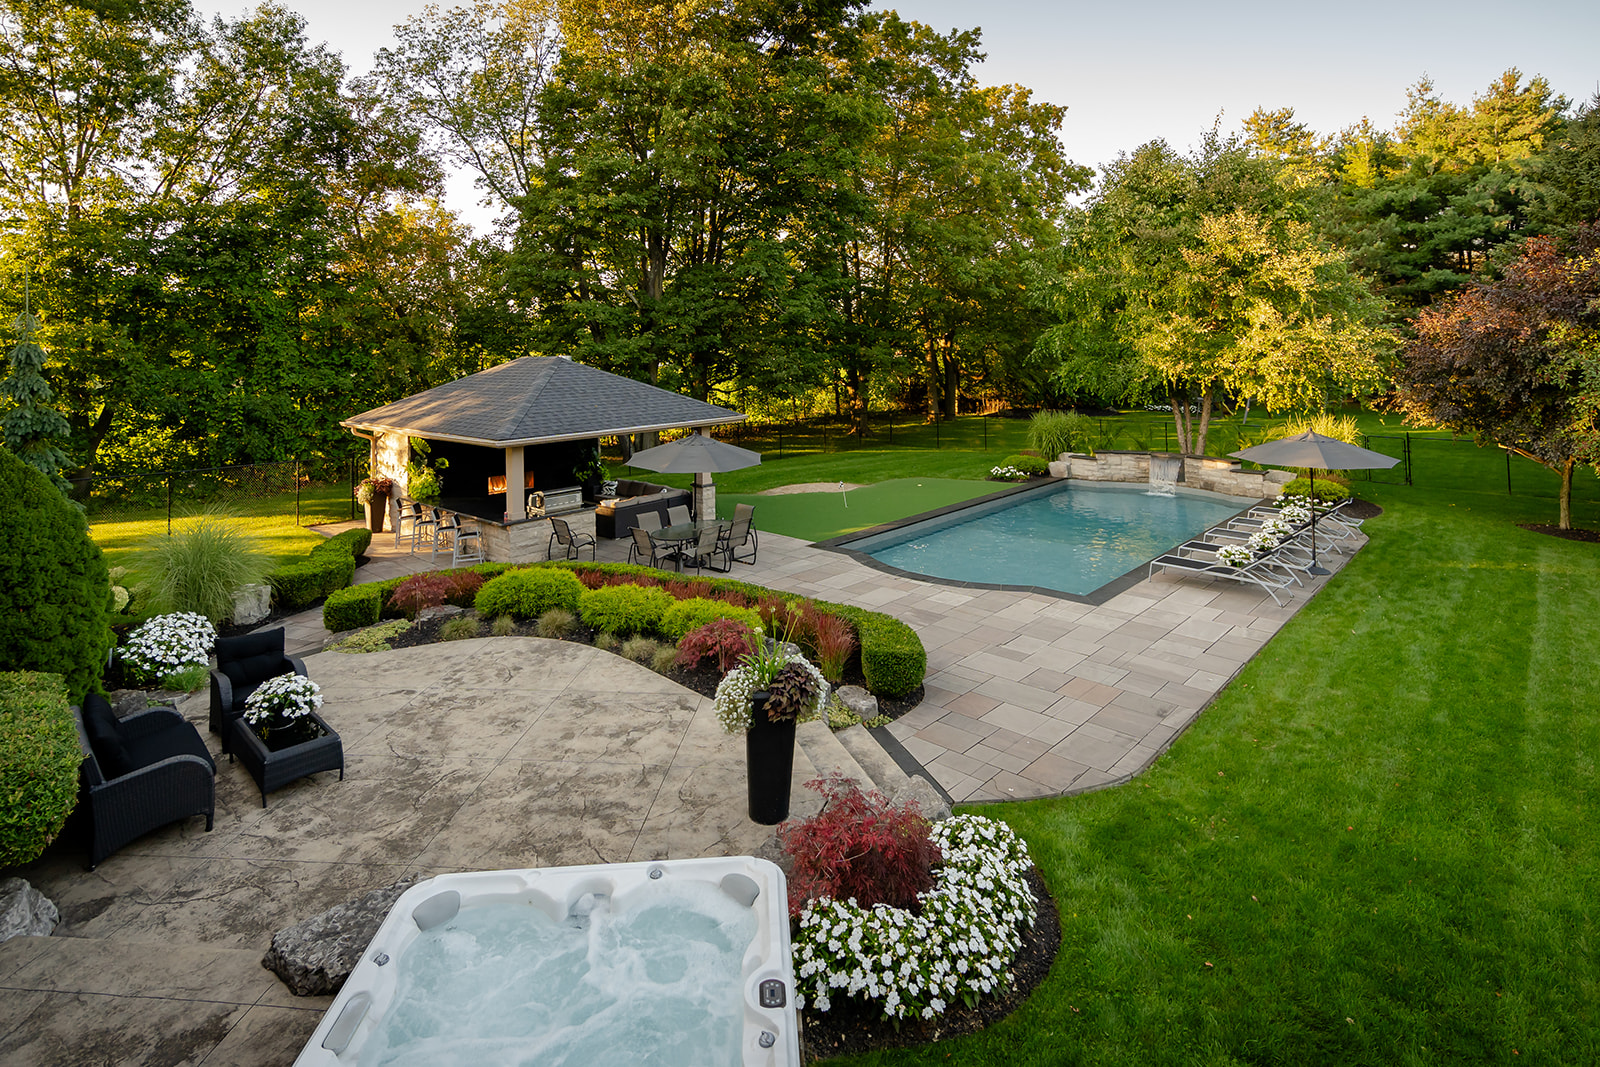 An inground pool with a mini waterfall flowing into it with lawn chairs on the right.